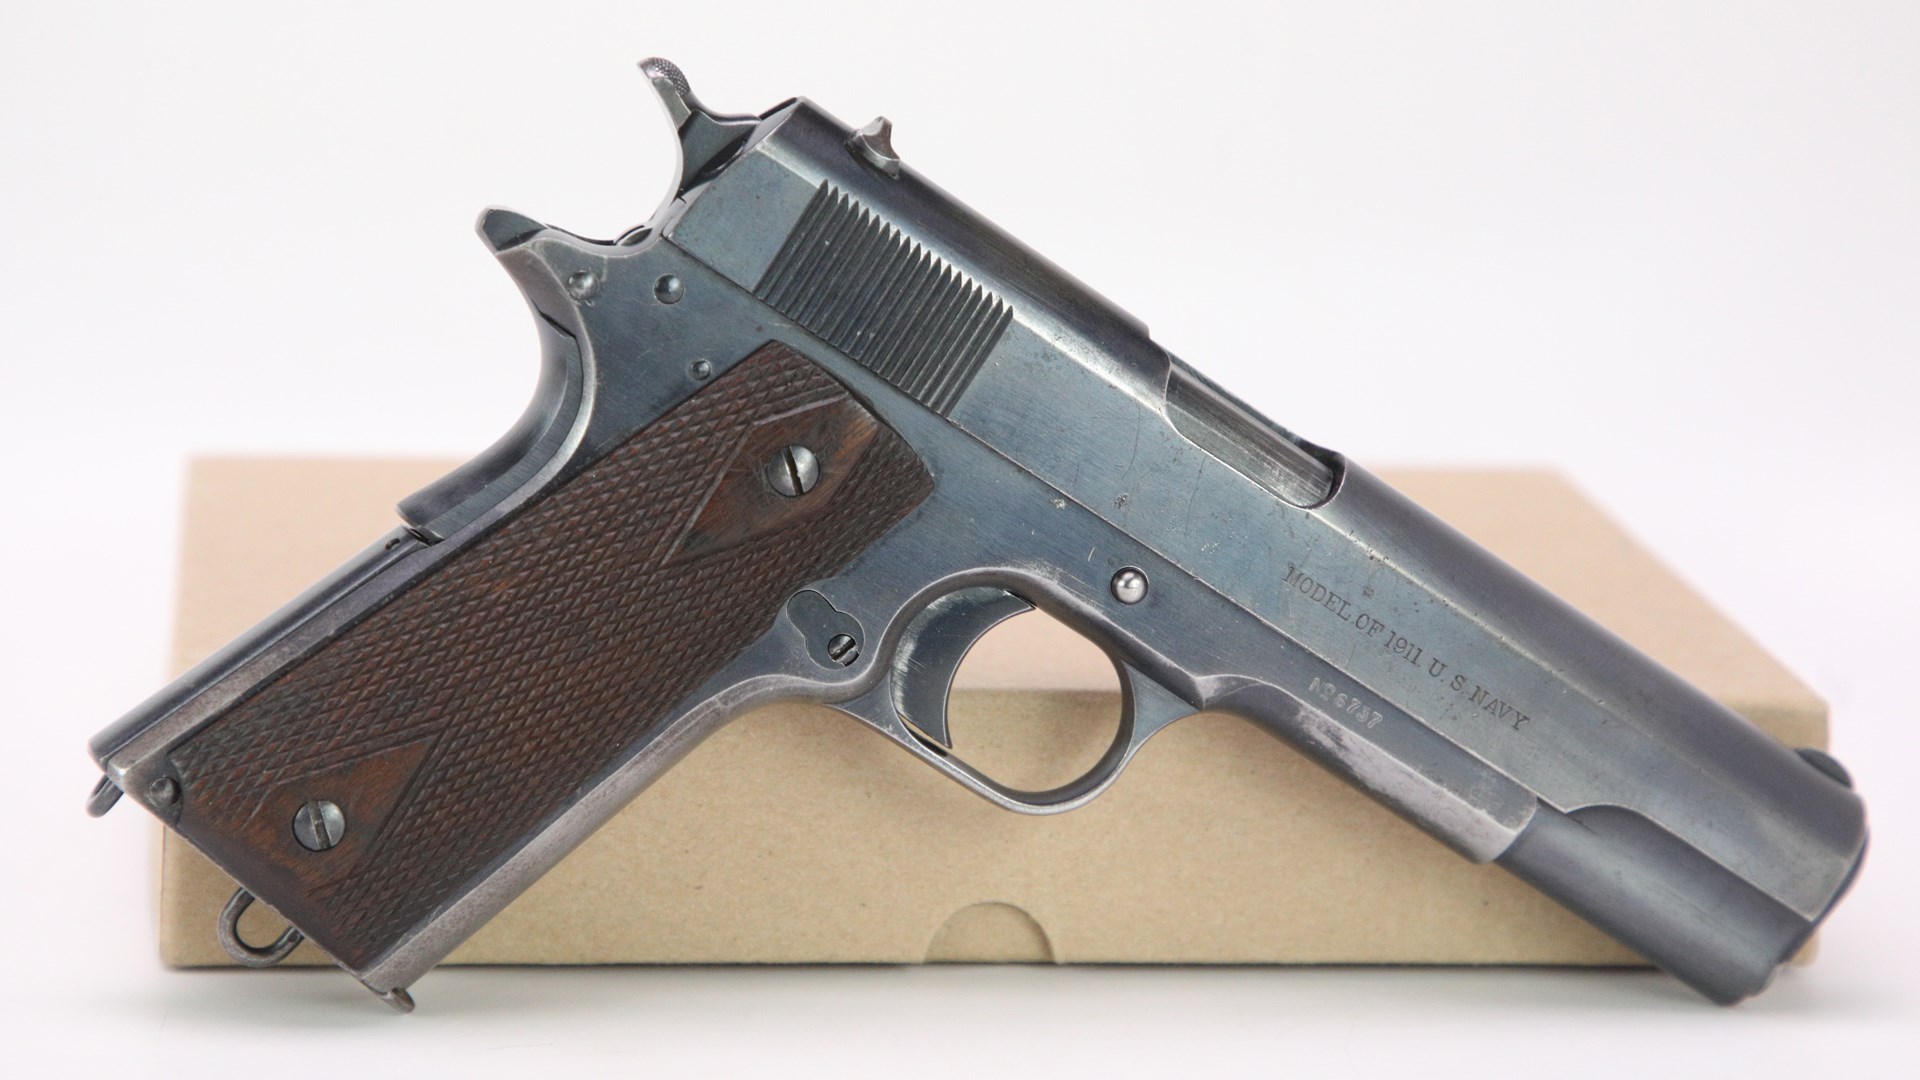 A 4-Digit 1912 Production WWI Colt Model of 1911 U.S. Navy .45 ACP Pistol from the second year of production.